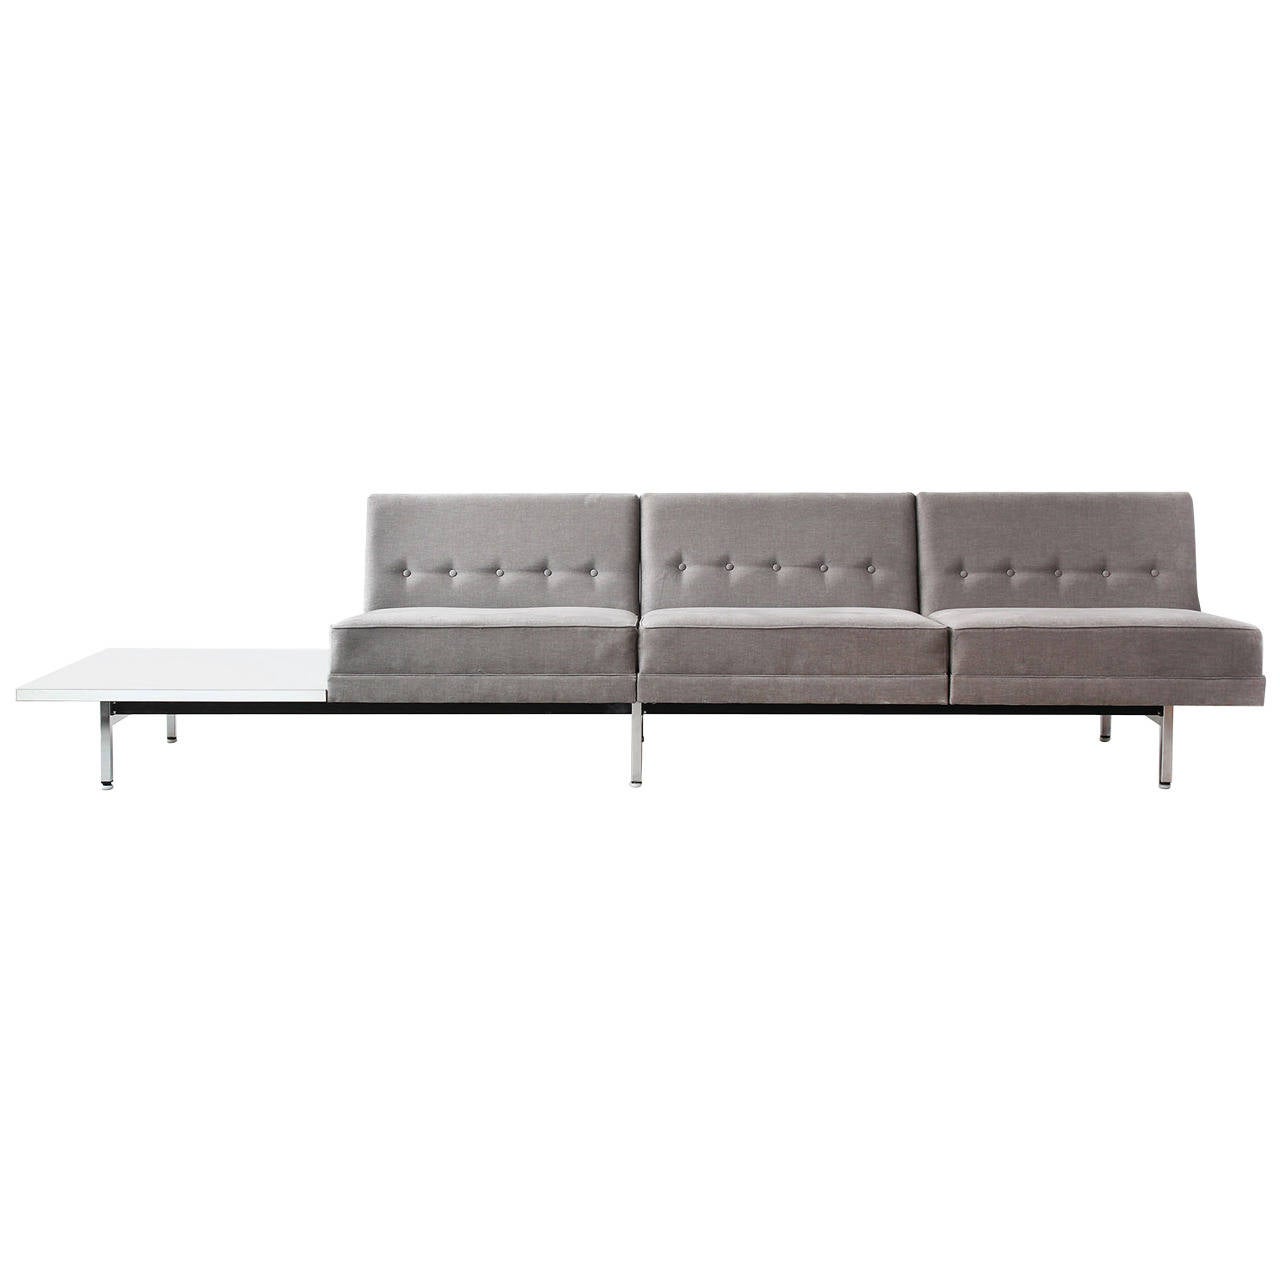 Modular System Sofa by George Nelson for Herman Miller For Sale